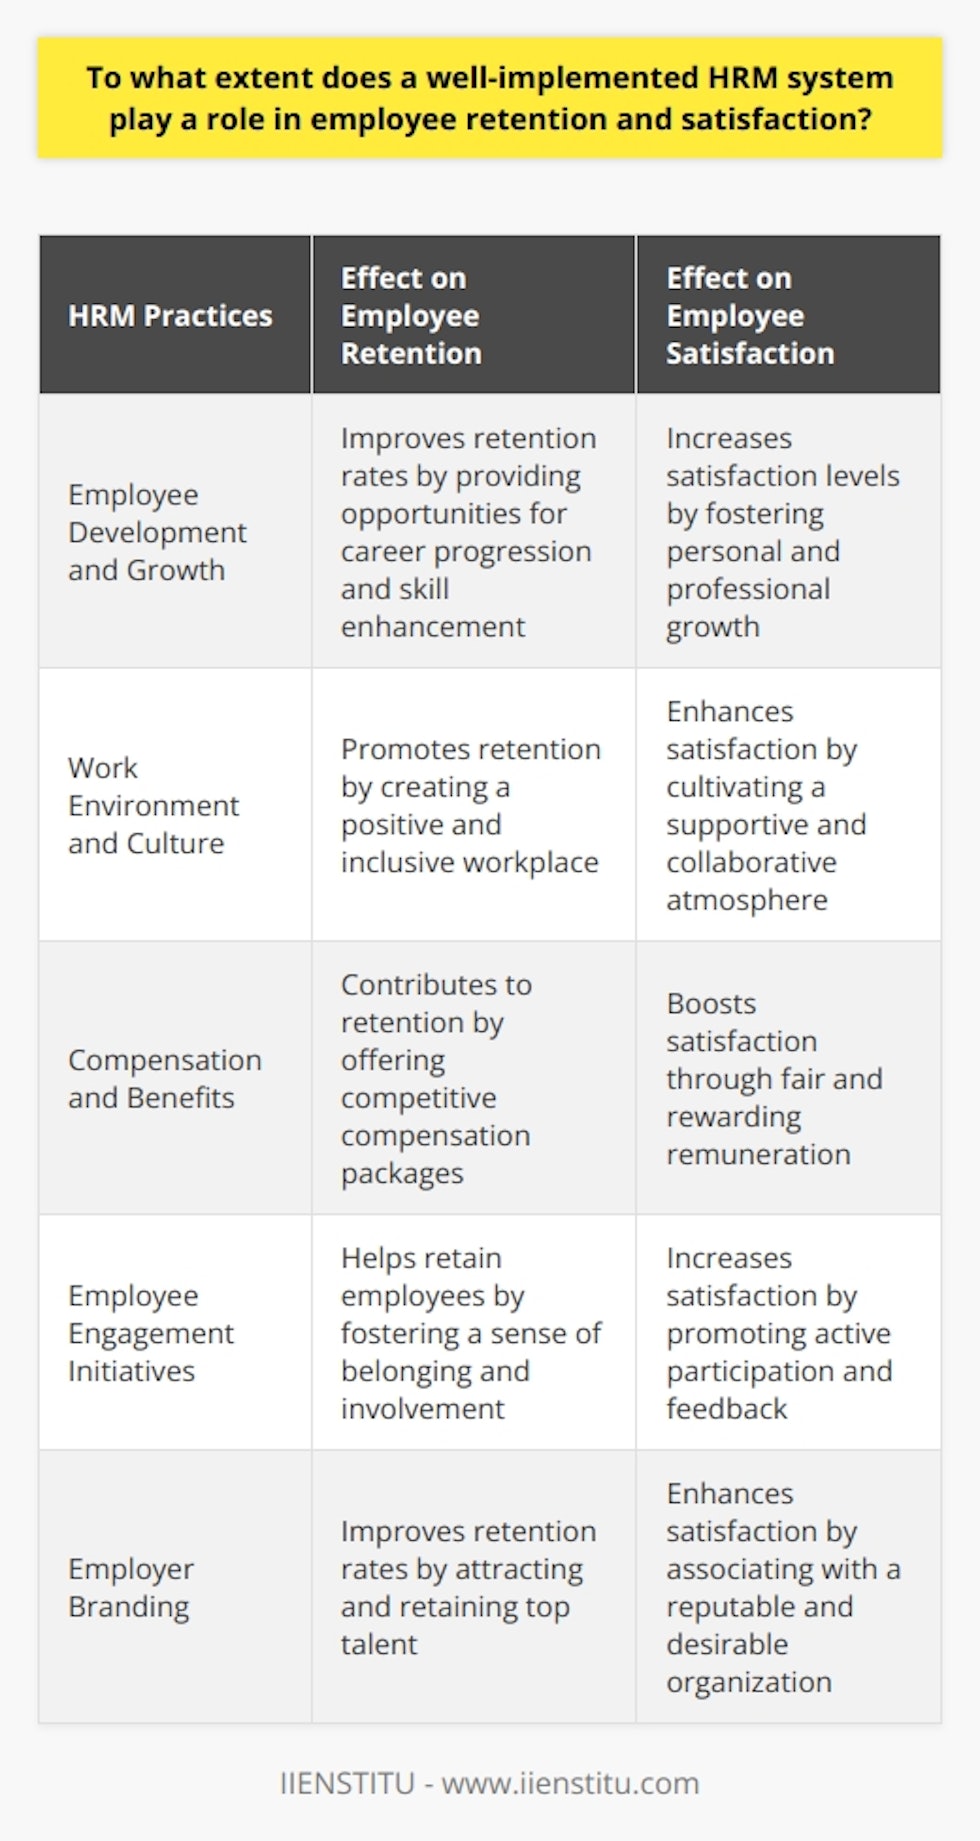 A strong HRM system contributes to employee retention and satisfaction by focusing on employee development and growth, establishing a positive work environment and culture, offering competitive compensation and benefits, and implementing employee engagement initiatives. These practices help create a strong employer brand and improve overall retention rates within organizations. By prioritizing the needs and well-being of employees, organizations can foster a loyal and satisfied workforce, leading to increased productivity and success.